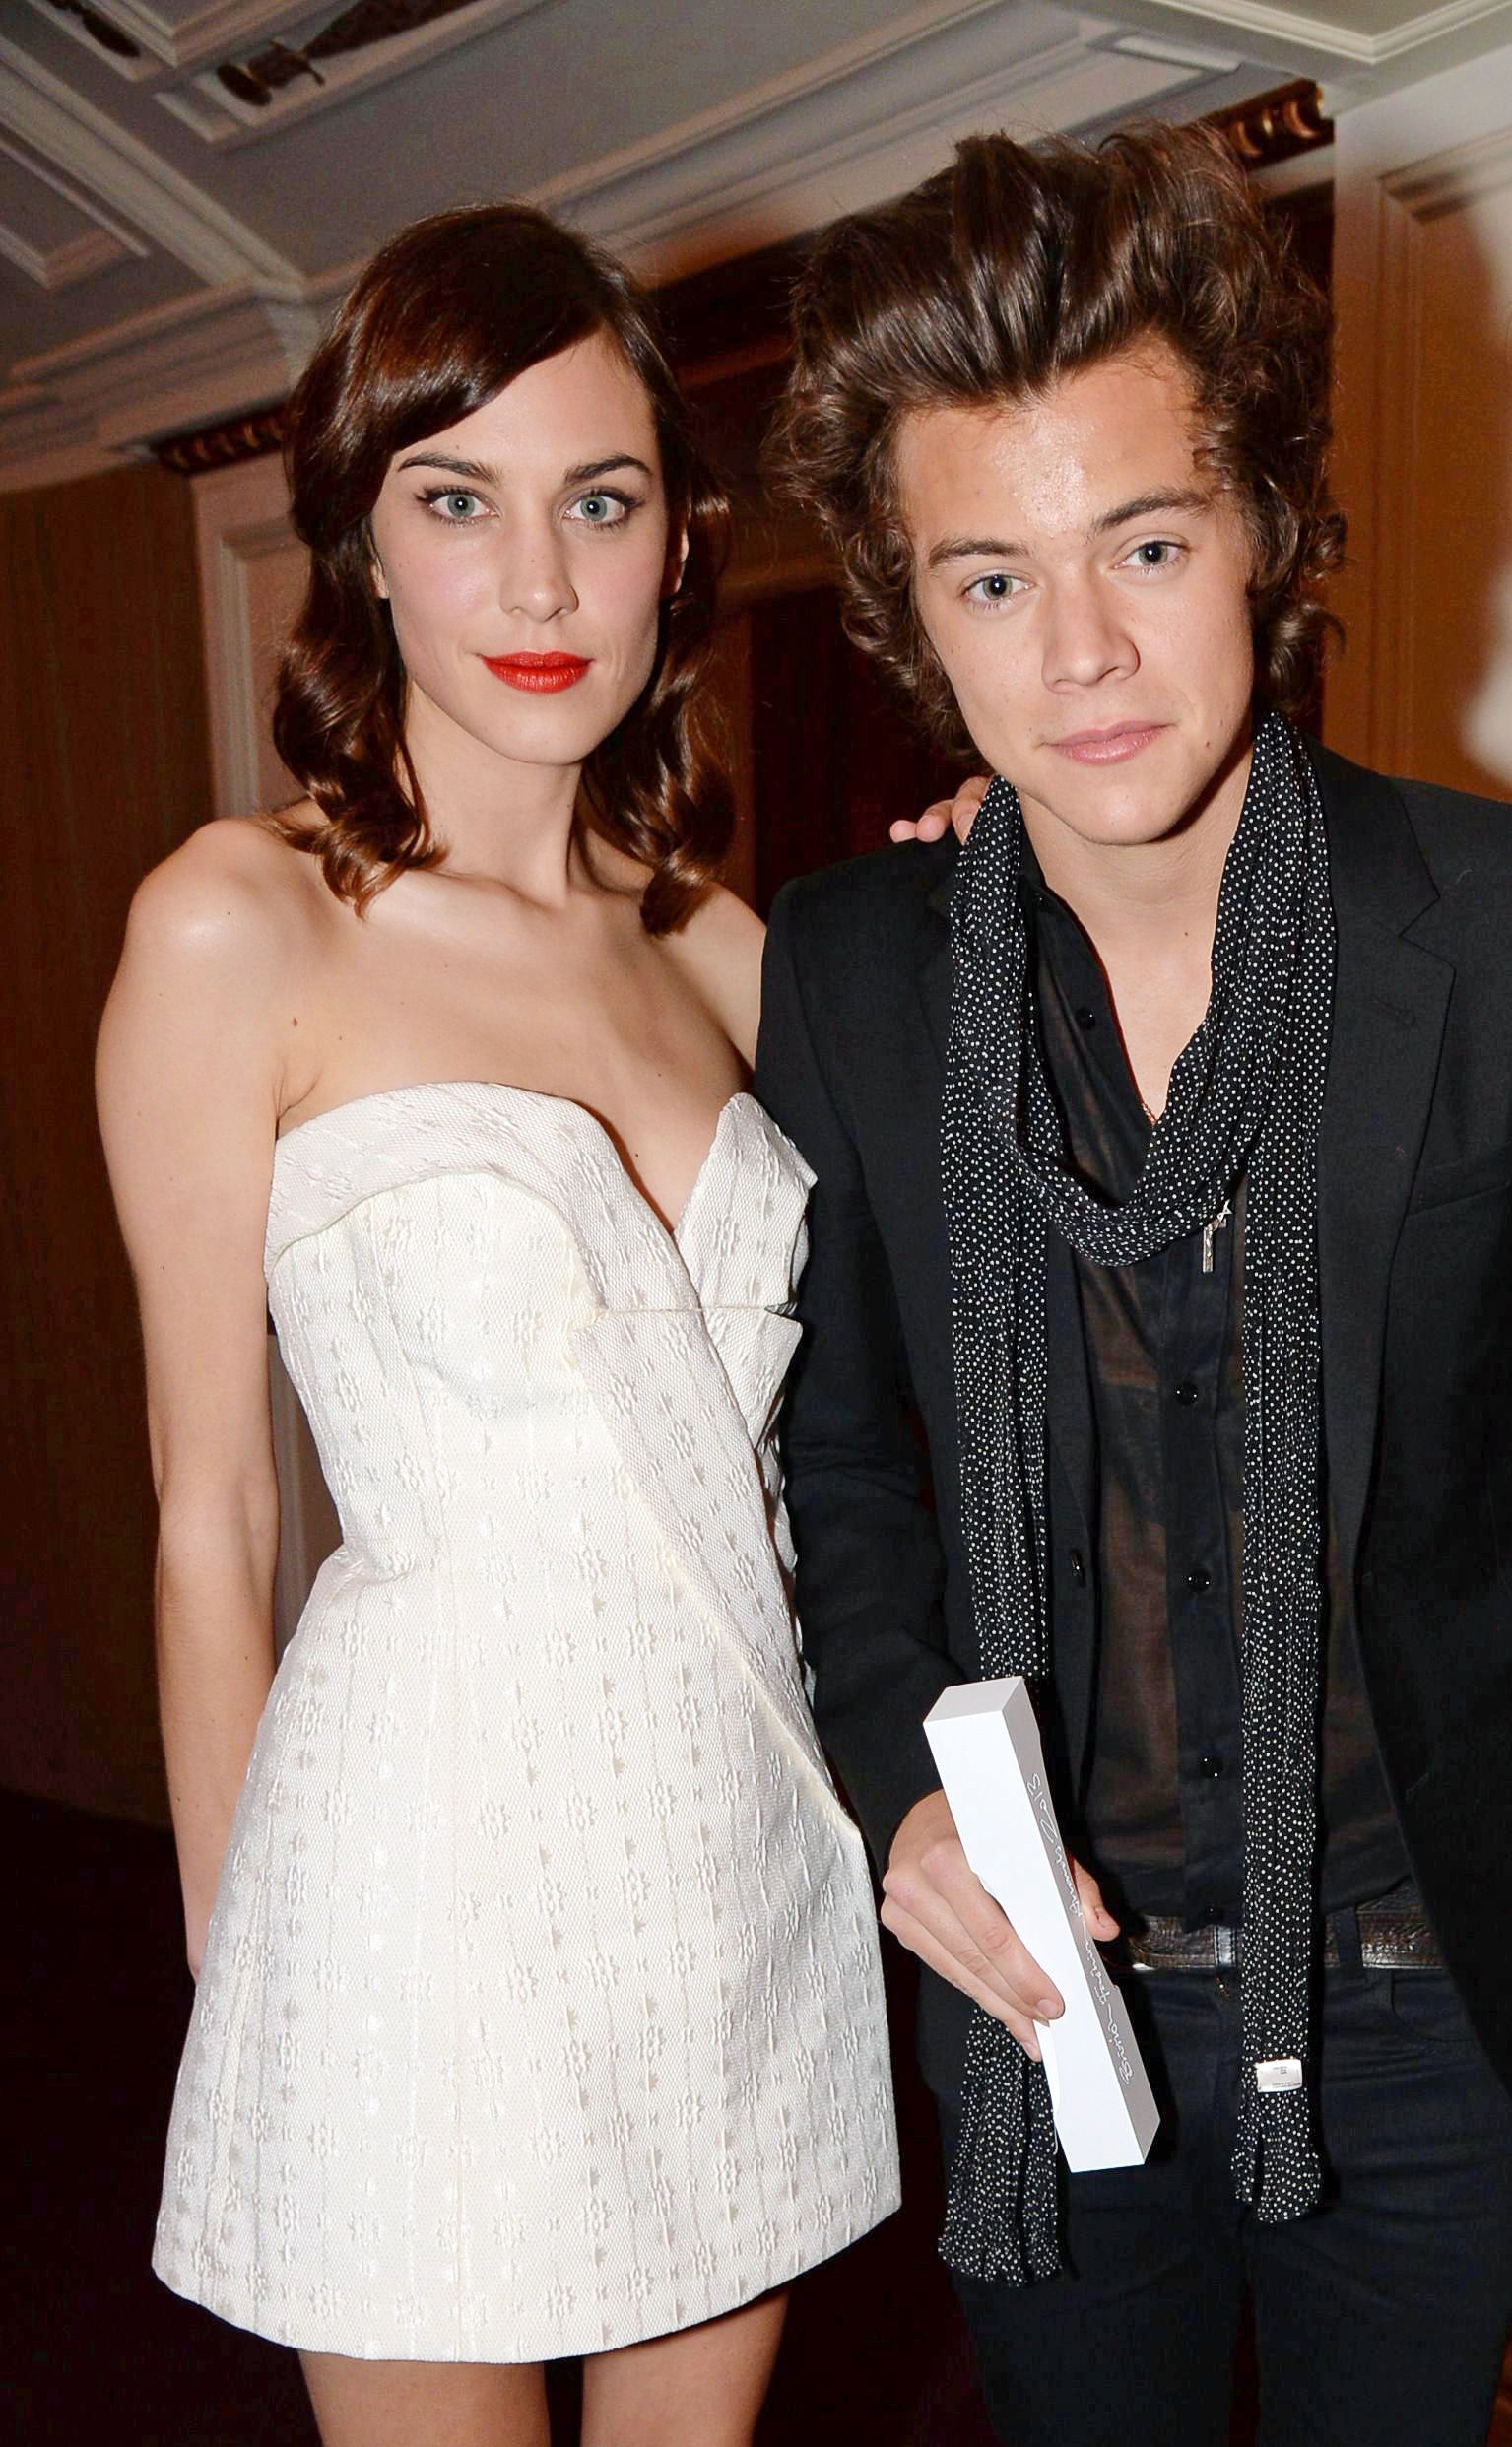 Harry Styles Ex Girlfriends Past Relationships 21 ?fit=1535%2C2484